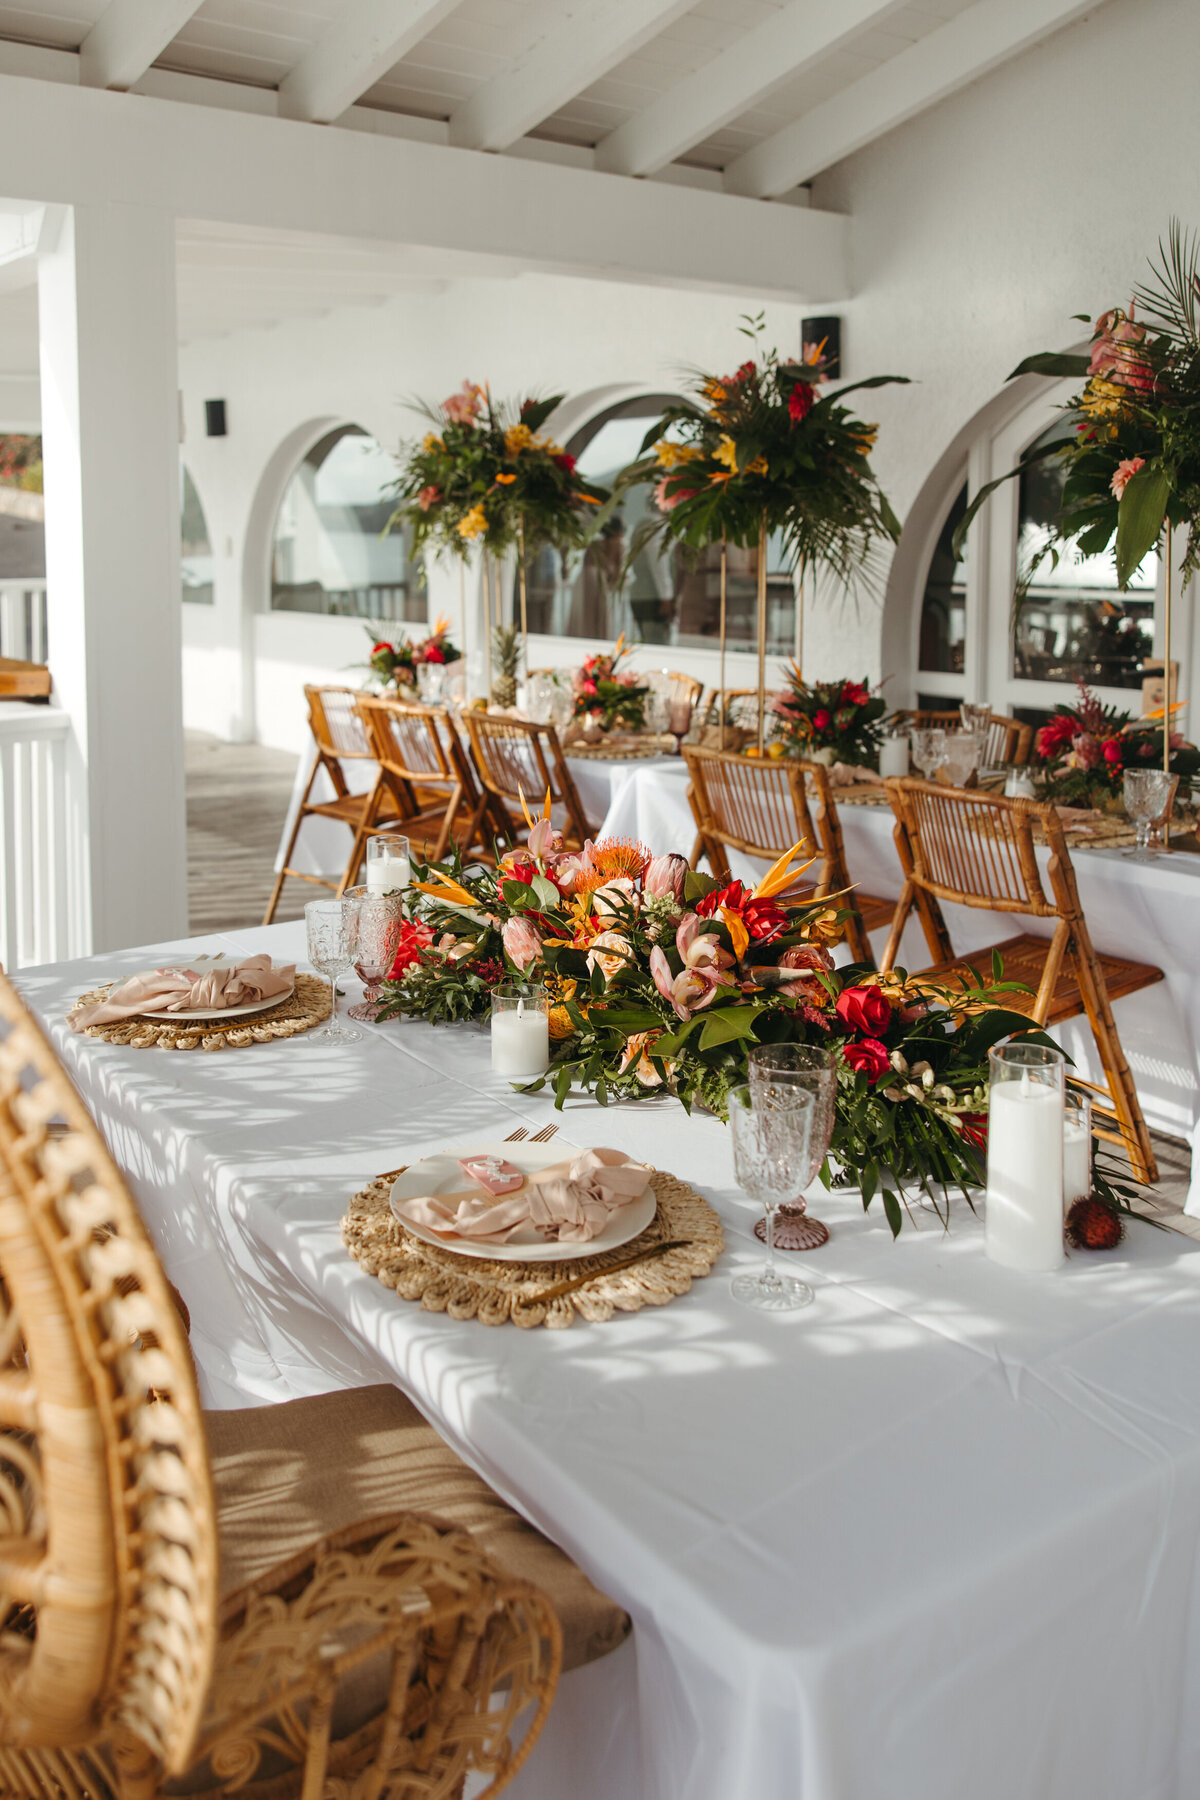 A tropical-themed wedding tablescape with vibrant floral arrangements and rattan chairs on a white linen table